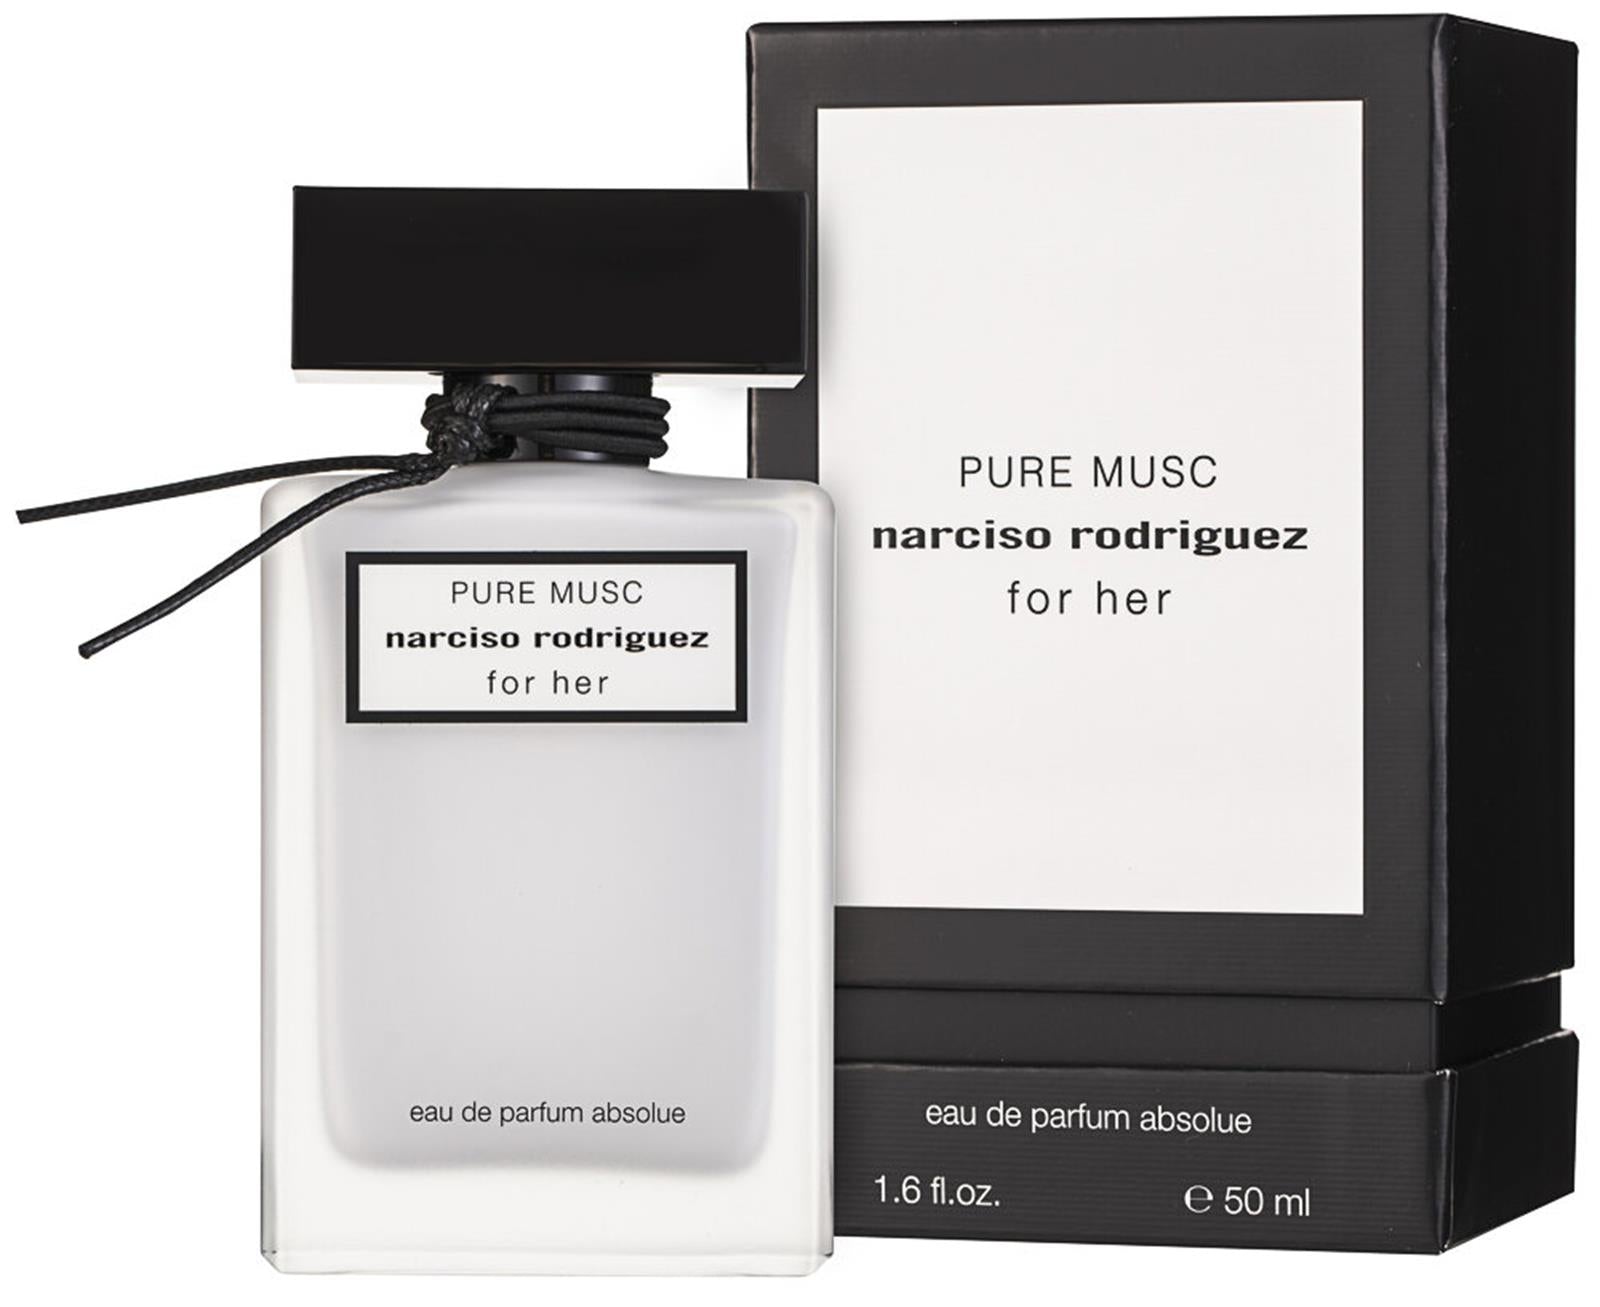 Narciso Rodriguez Musc Oil for him.